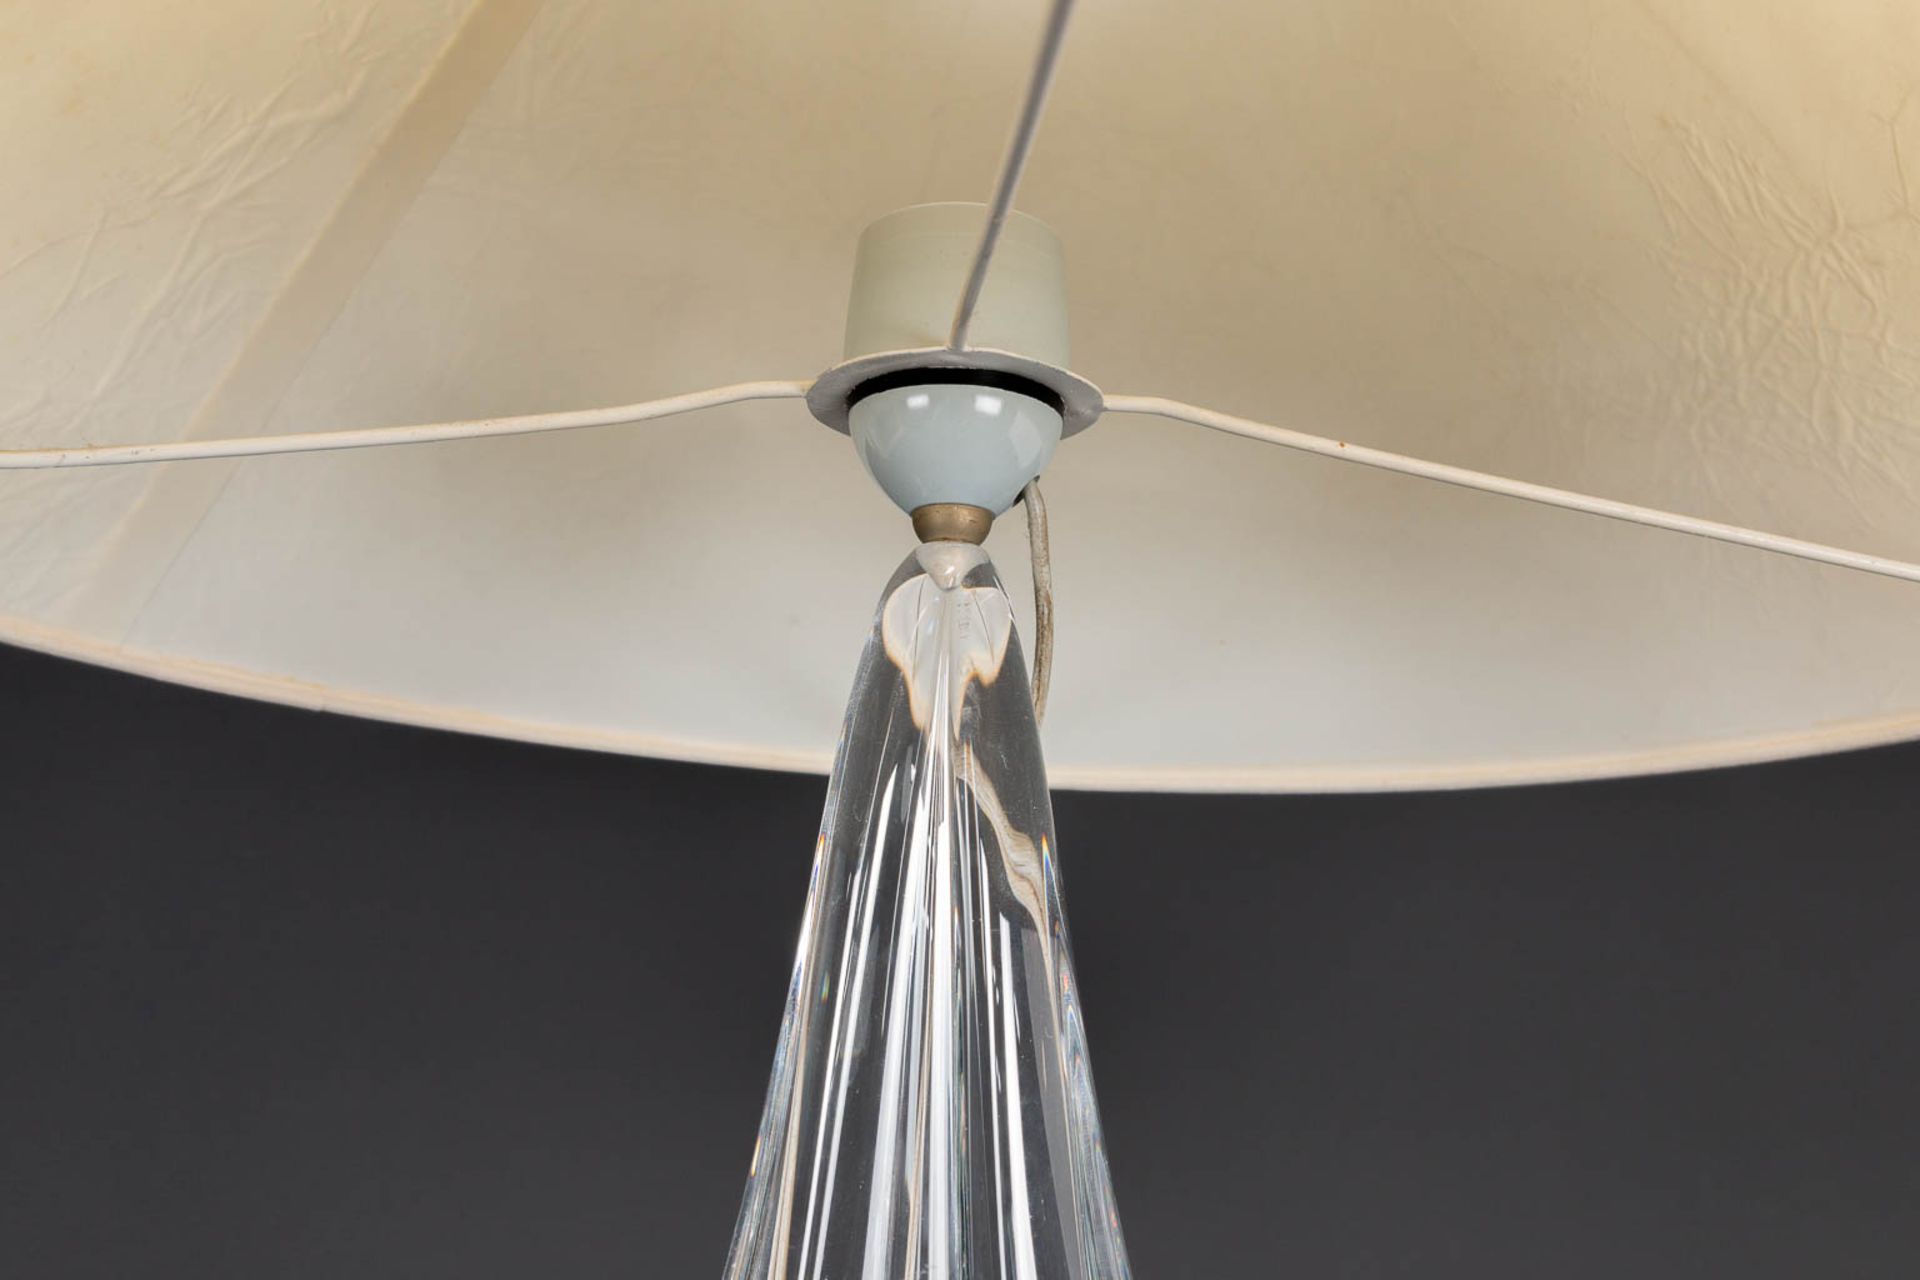 A Daum Nancy table lamp made of crystal with a fabric lamp shade. 20th century. (9 x 9 x 33 cm) - Image 5 of 12